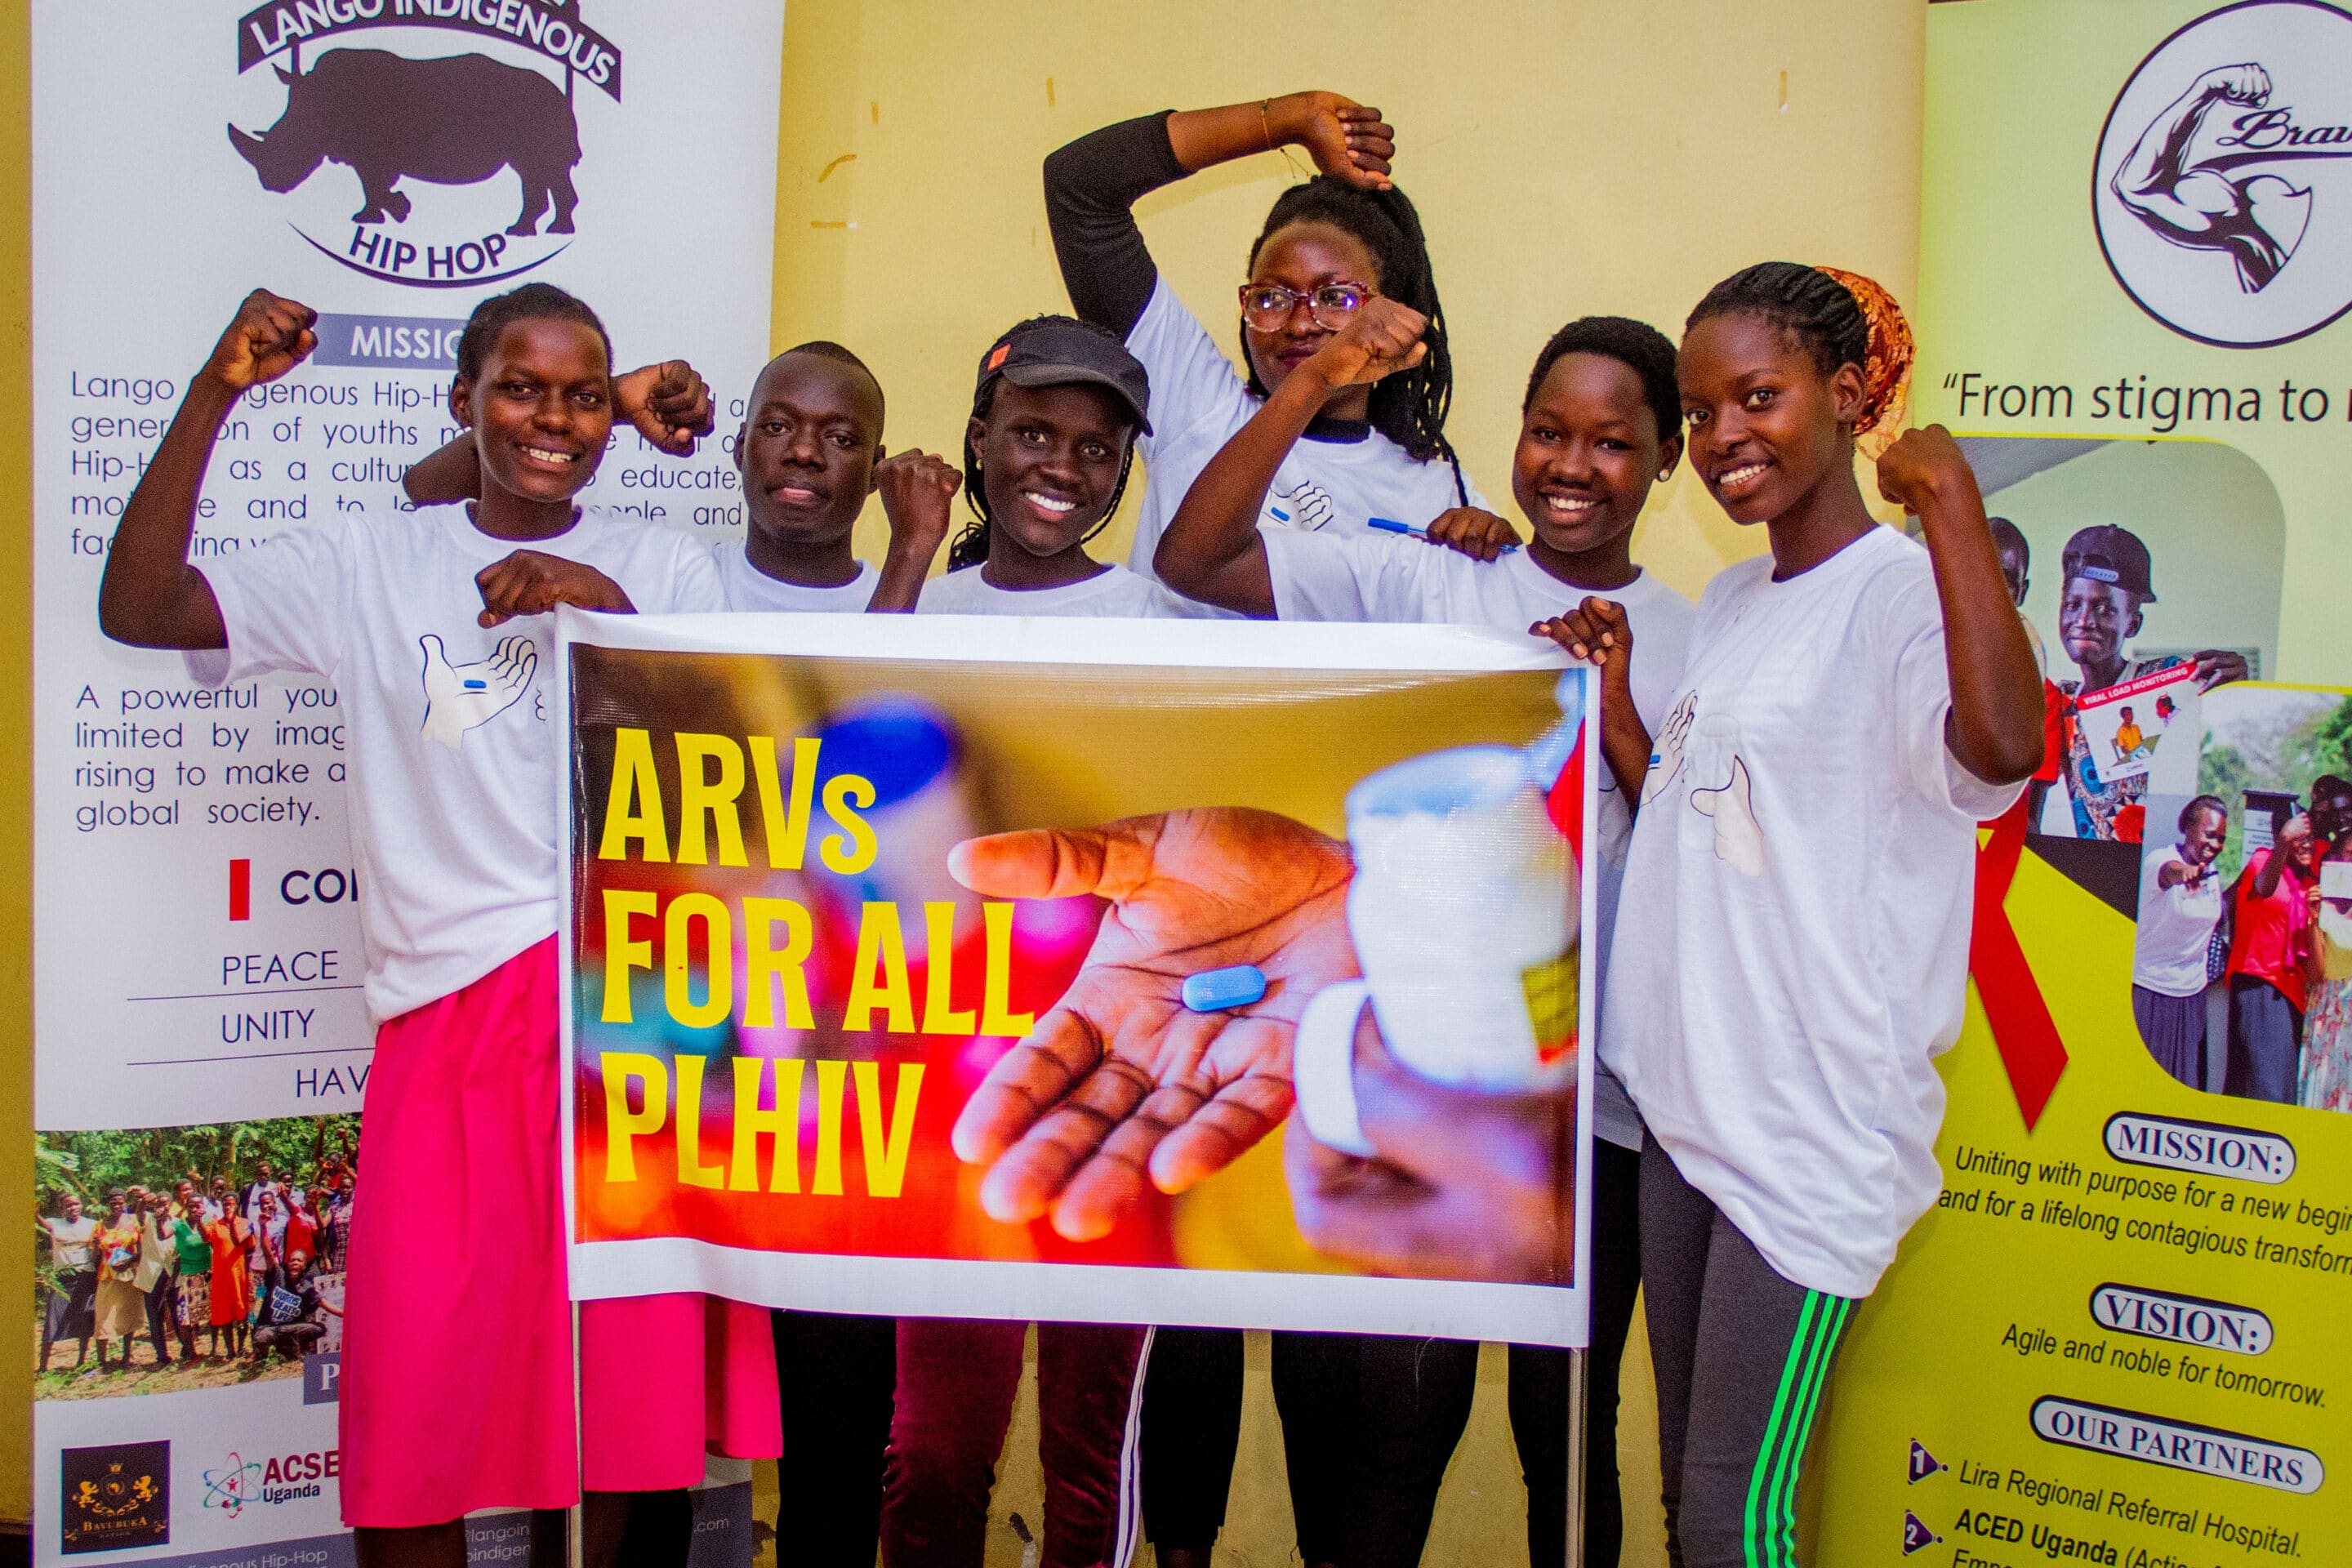 A group of young people holding a banner advocating for ARV's for all PLHIV